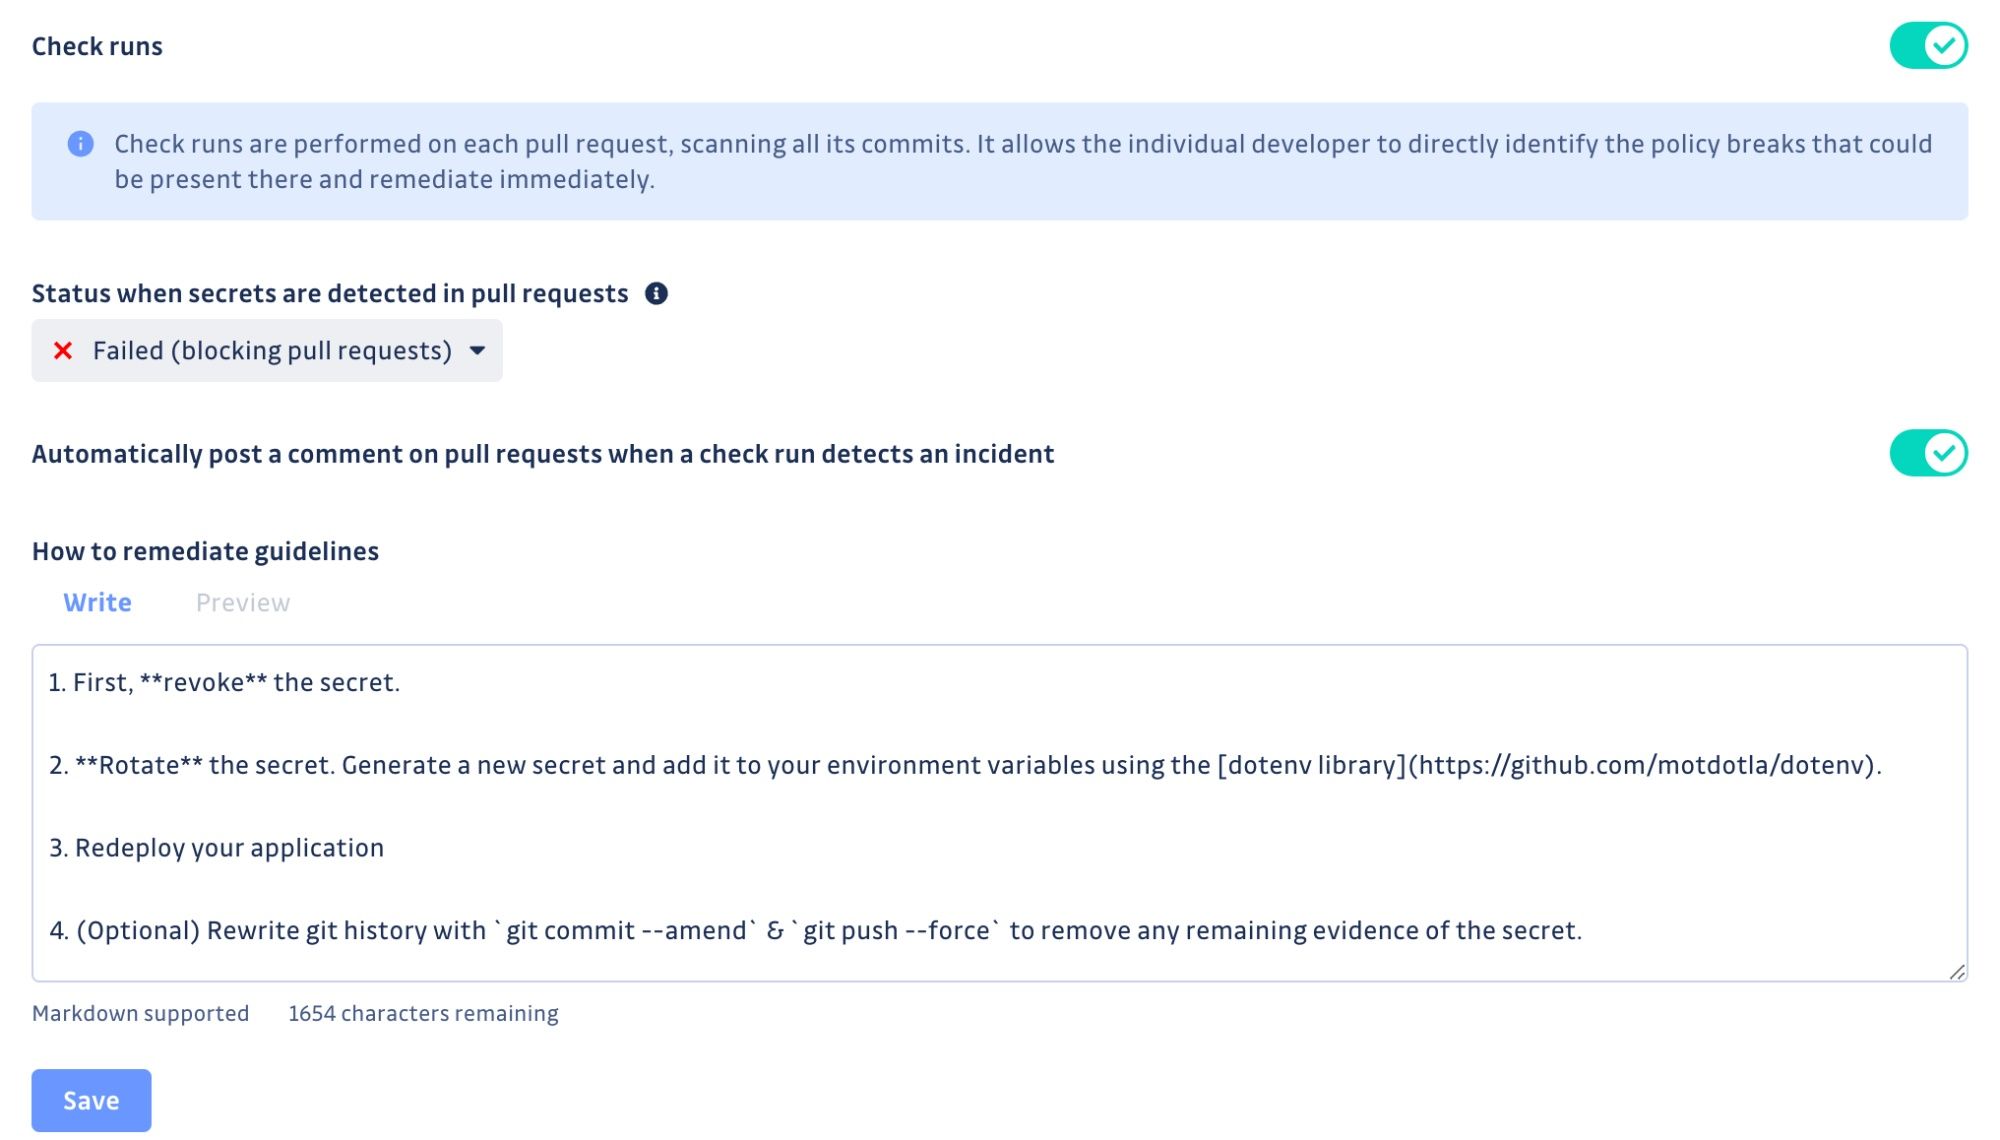 Screenshot of customizable remediation guidelines from the GitGuardian UI